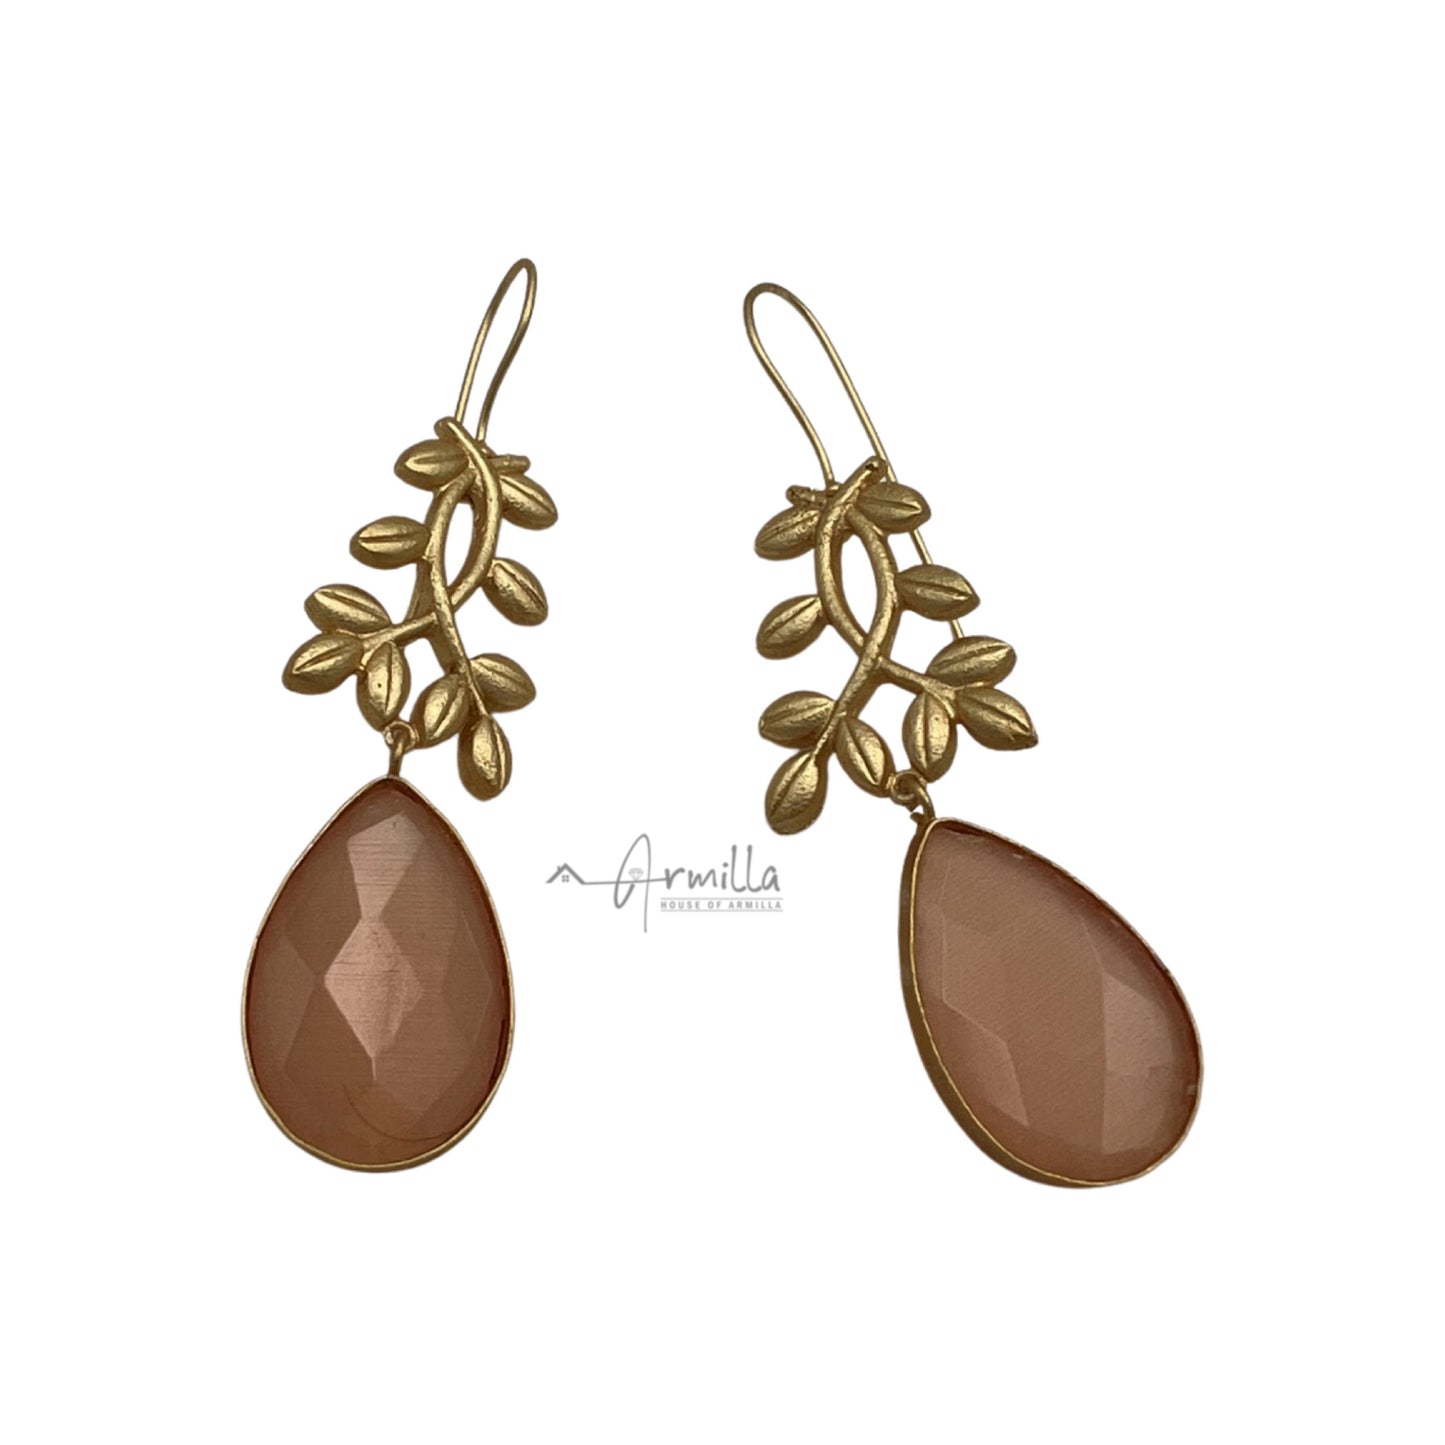 Light Orange Stone In Tear Drop Design with a Beautiful Gold Leaf Carved On The Top